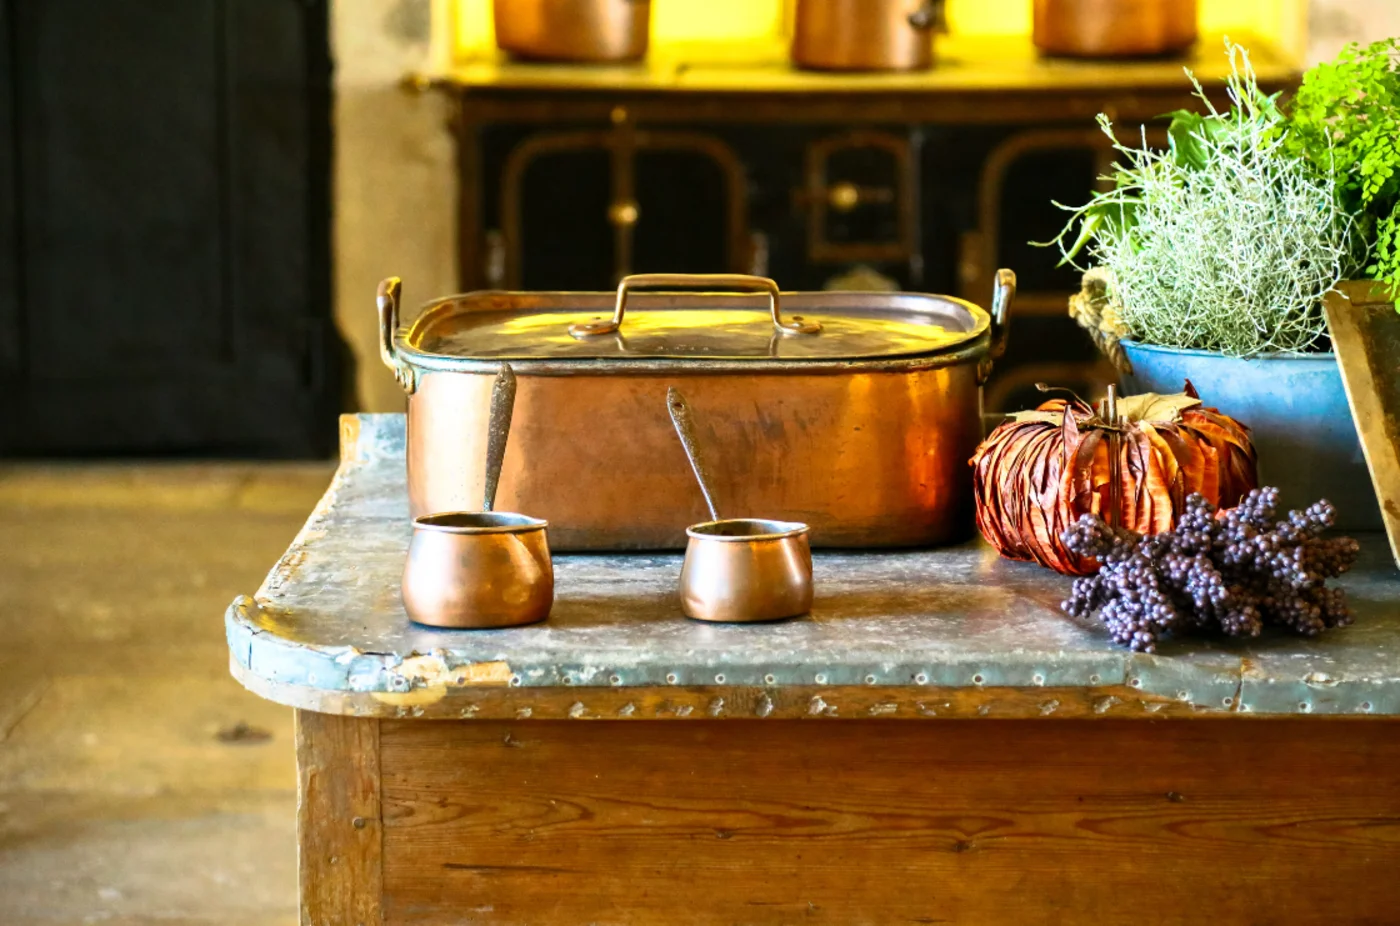 How to add value to your home. An old style cooking pot with some plants on the side.